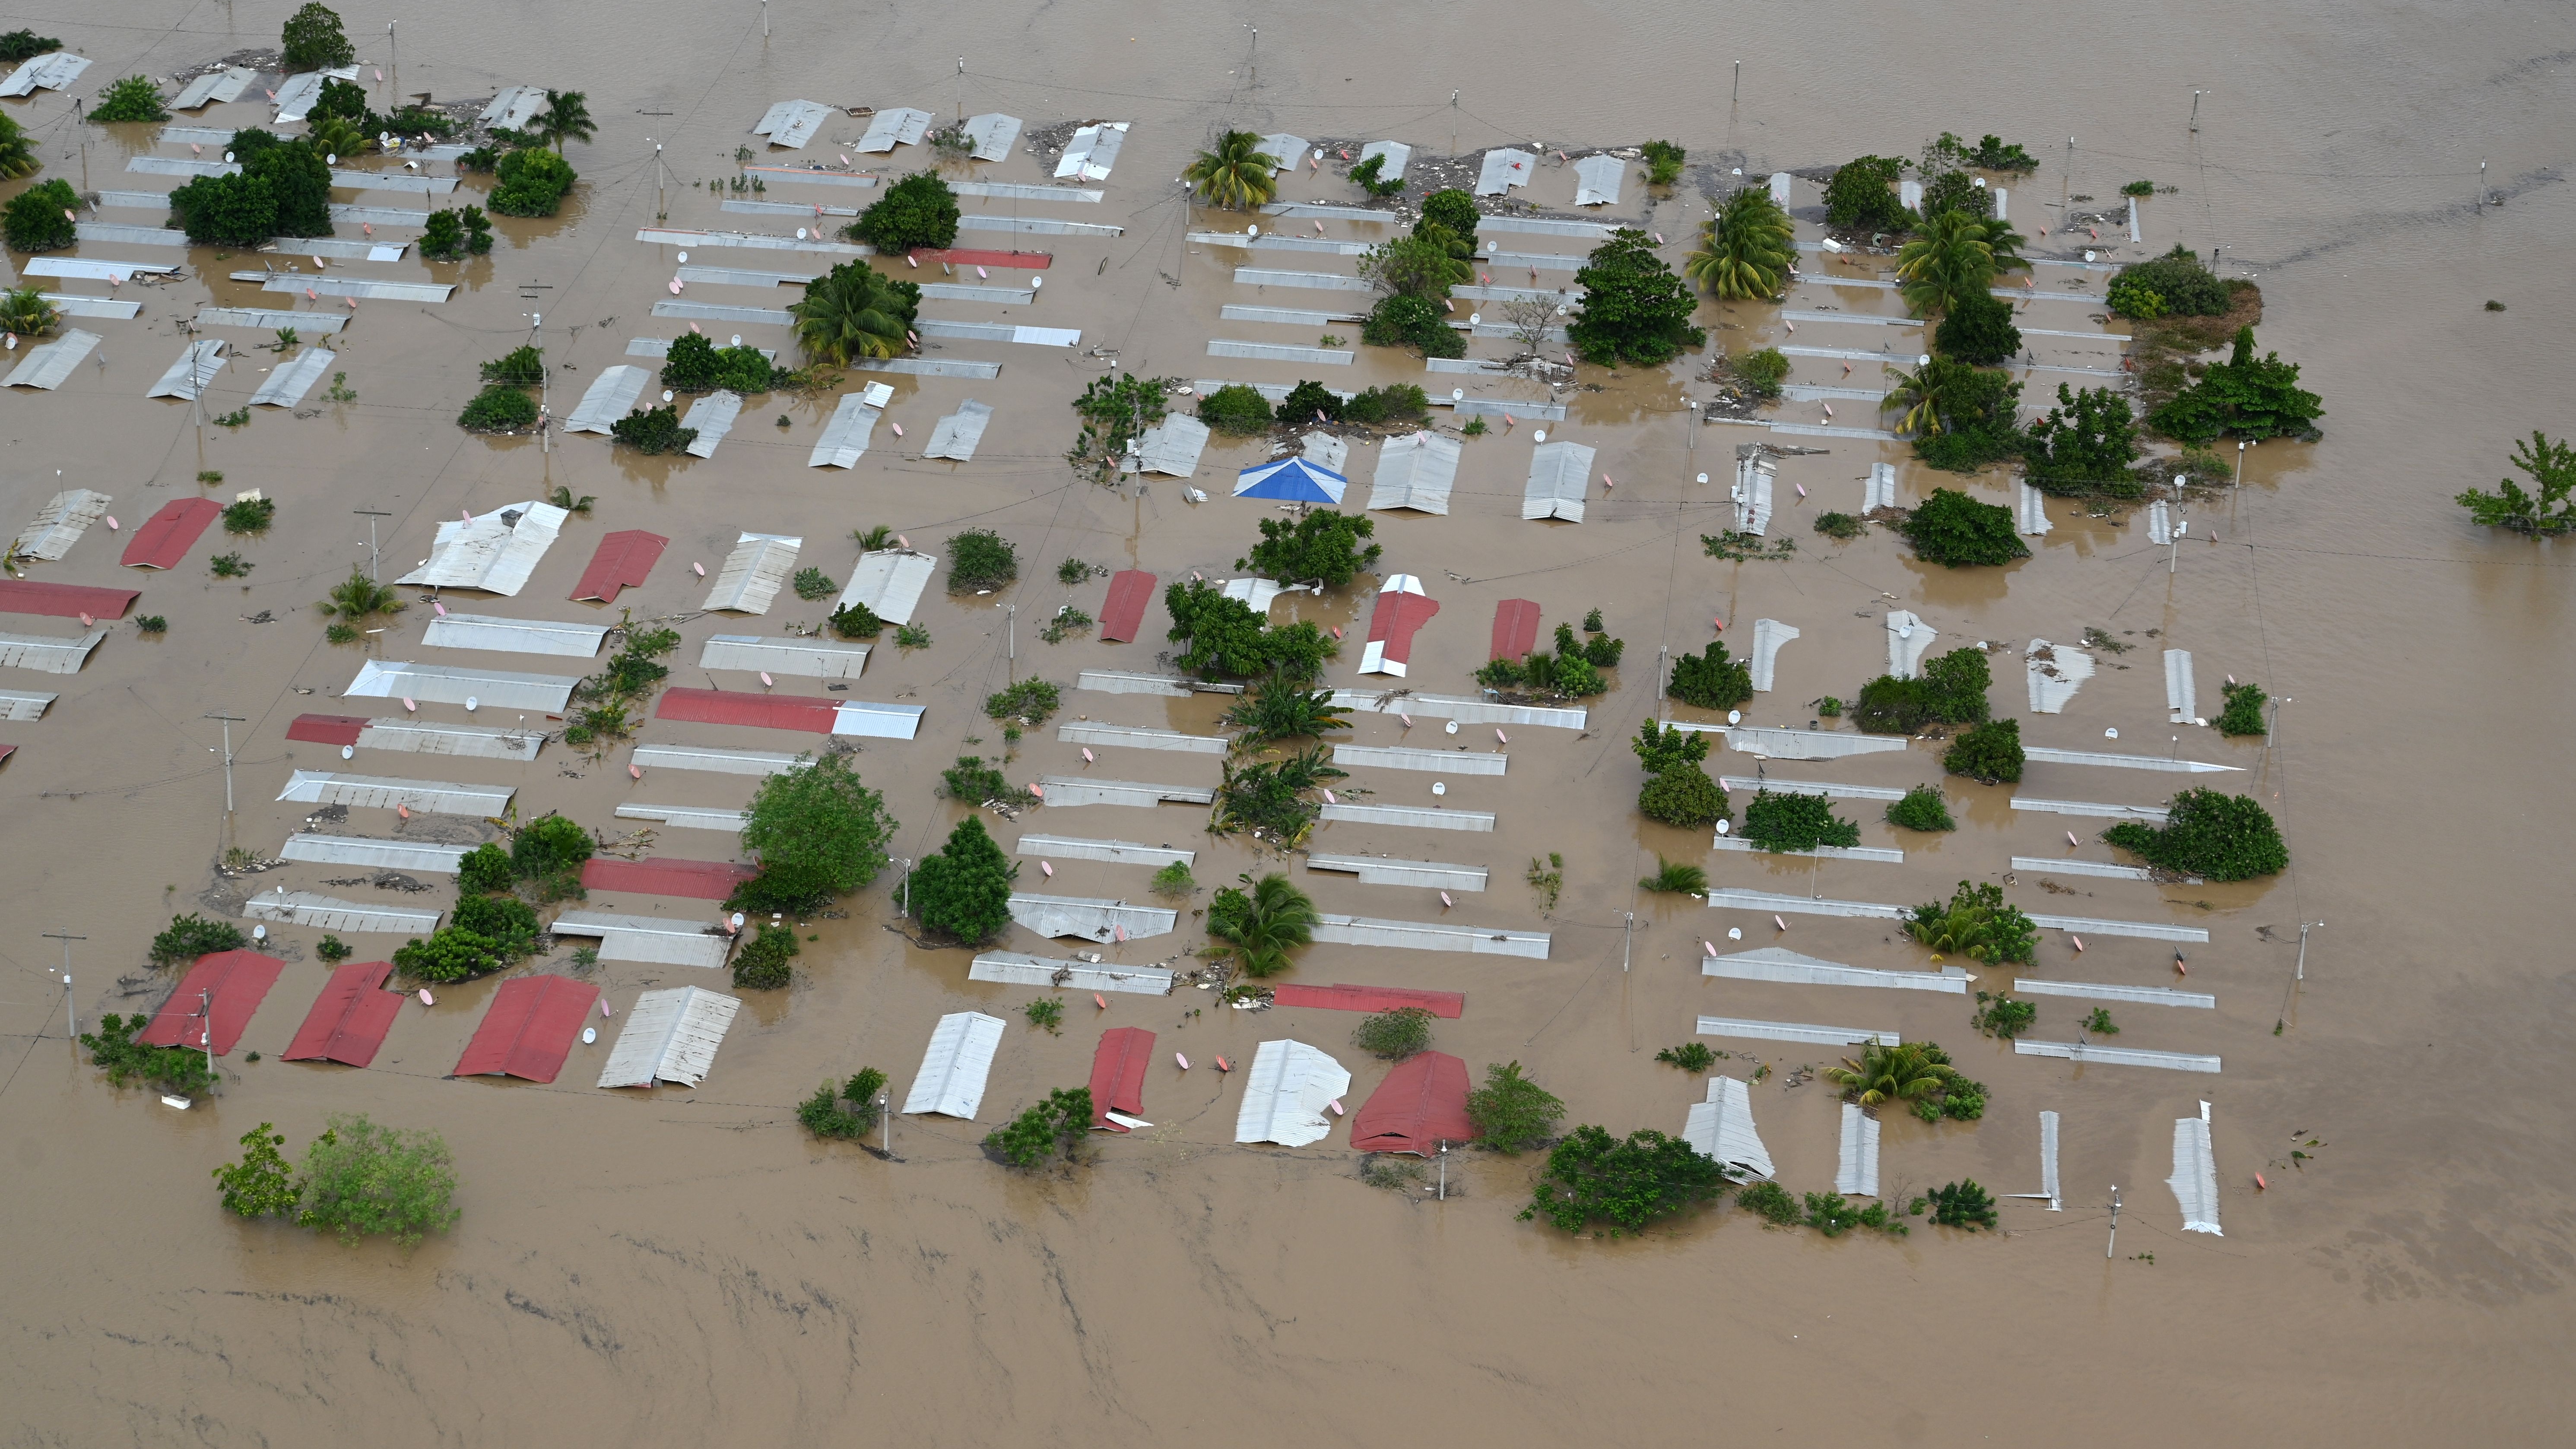 TOPSHOT - Aerial view an area around San Pedro Sula, 240 km north of Tegucigalpa, flooded by the overflowing of the Chamelecon river after the passage of Hurricane Iota, taken on November 18, 2020. - Storm Iota, which made landfall in Nicaragua as a "catastrophic" Category 5 hurricane Monday, killed at least ten people as it smashed homes, uprooted trees and swamped roads during its destructive advance across Central America. (Photo by Orlando SIERRA / AFP) (Photo by ORLANDO SIERRA/AFP via Getty Images)